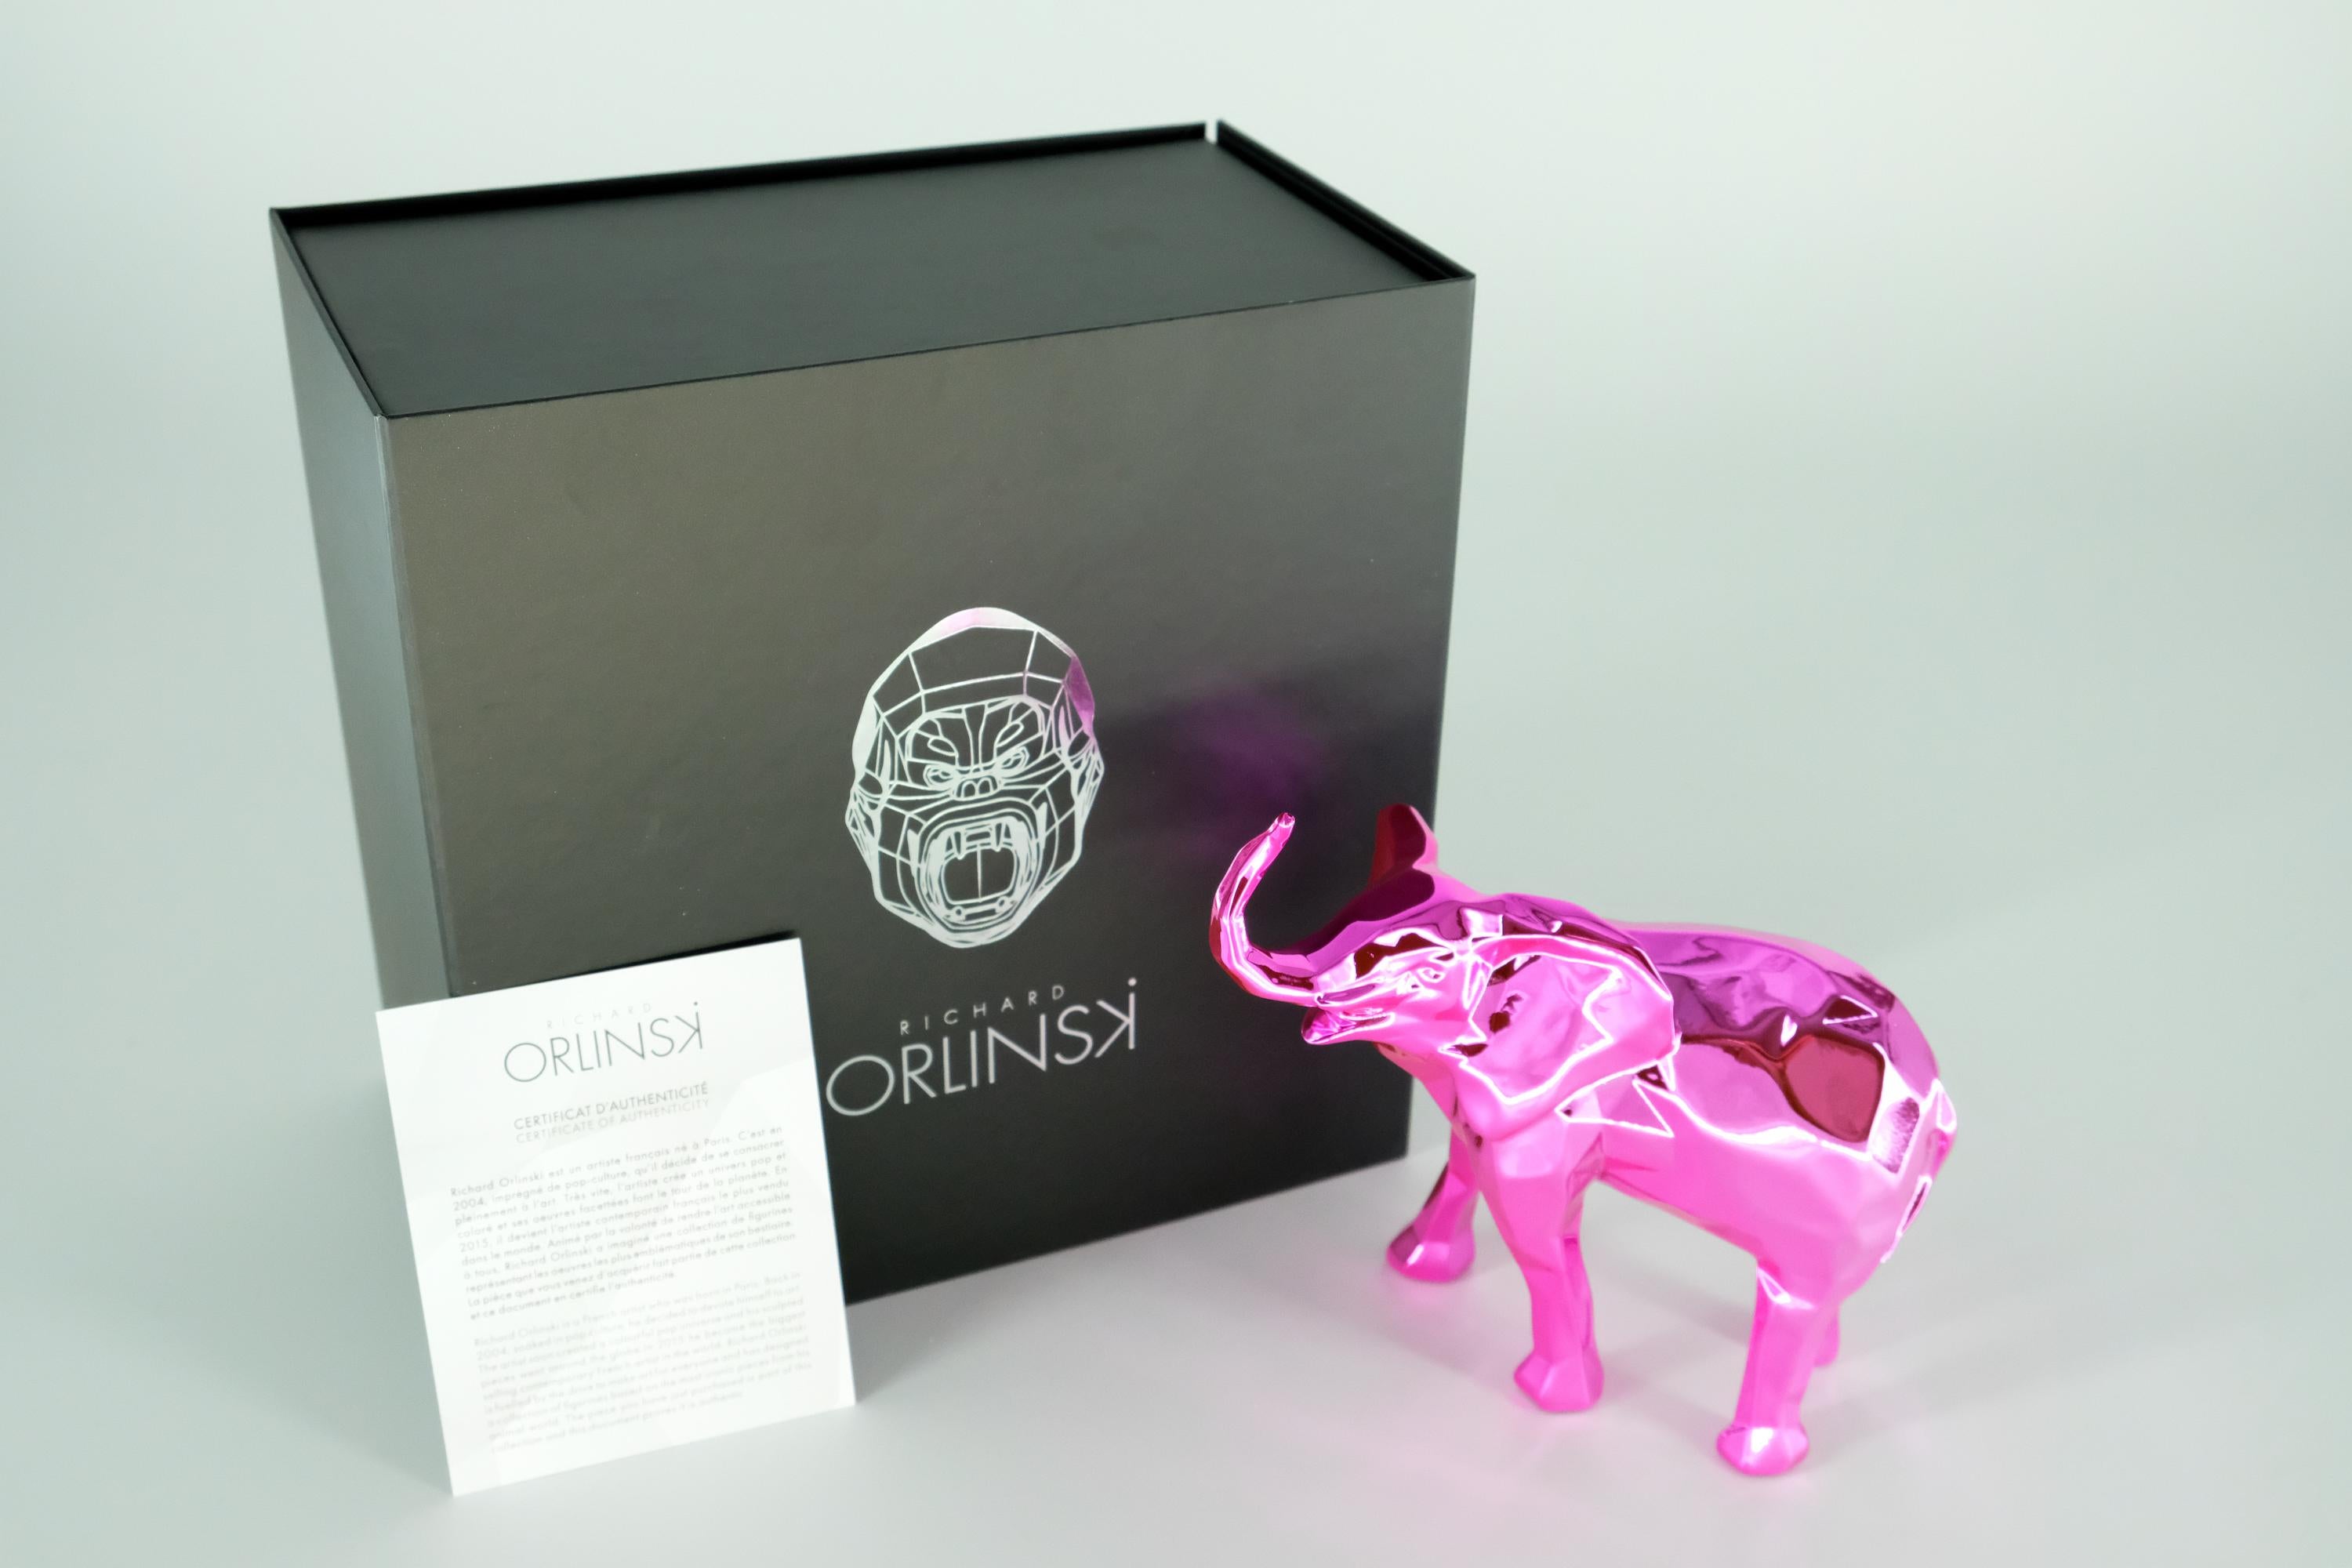 Richard ORLINSKI
Elephant Spirit (Pink Edition)

Sculpture in resin
Metallic Pink
About 14 x 12 x 5 cm (c. 5.5 x 4.7 x 2 in)
Presented in original box with certificate

Excellent condition